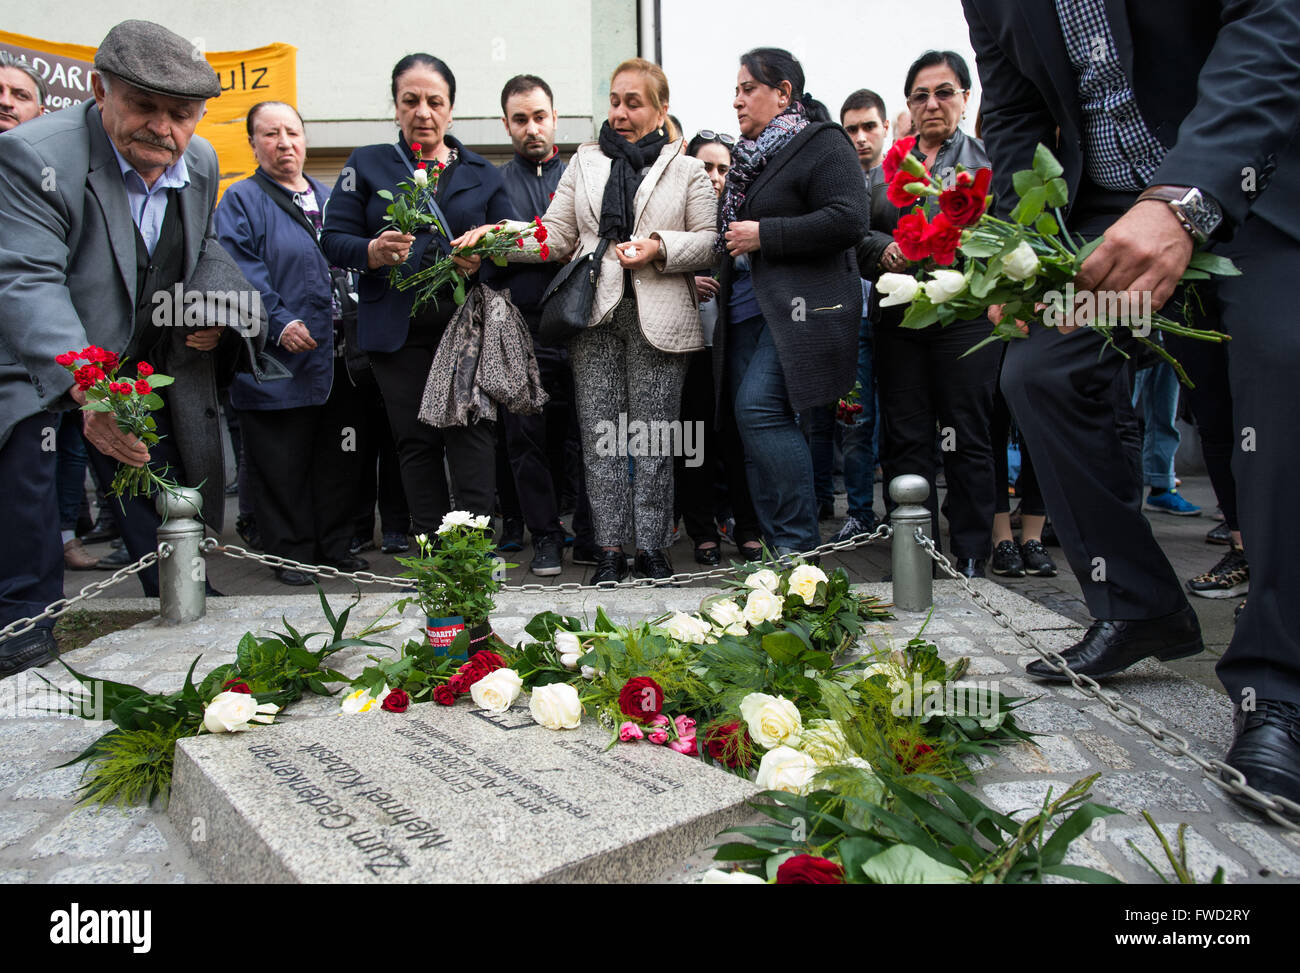 Dortmund, Germany. 4th Apr, 2016. The widow Elif Kubasik (3rd l) as well as family members and representatives of the city of Dortmund commemorate the cinema owner Mehmet Kubasik, murdered by the NSU terror group, in Dortmund, Germany, 4 April 2016. 10 years ago, Kubasik became the eighth victim of the Neonazi terror group. PHOTO: BERND THISSEN/dpa/Alamy Live News Stock Photo